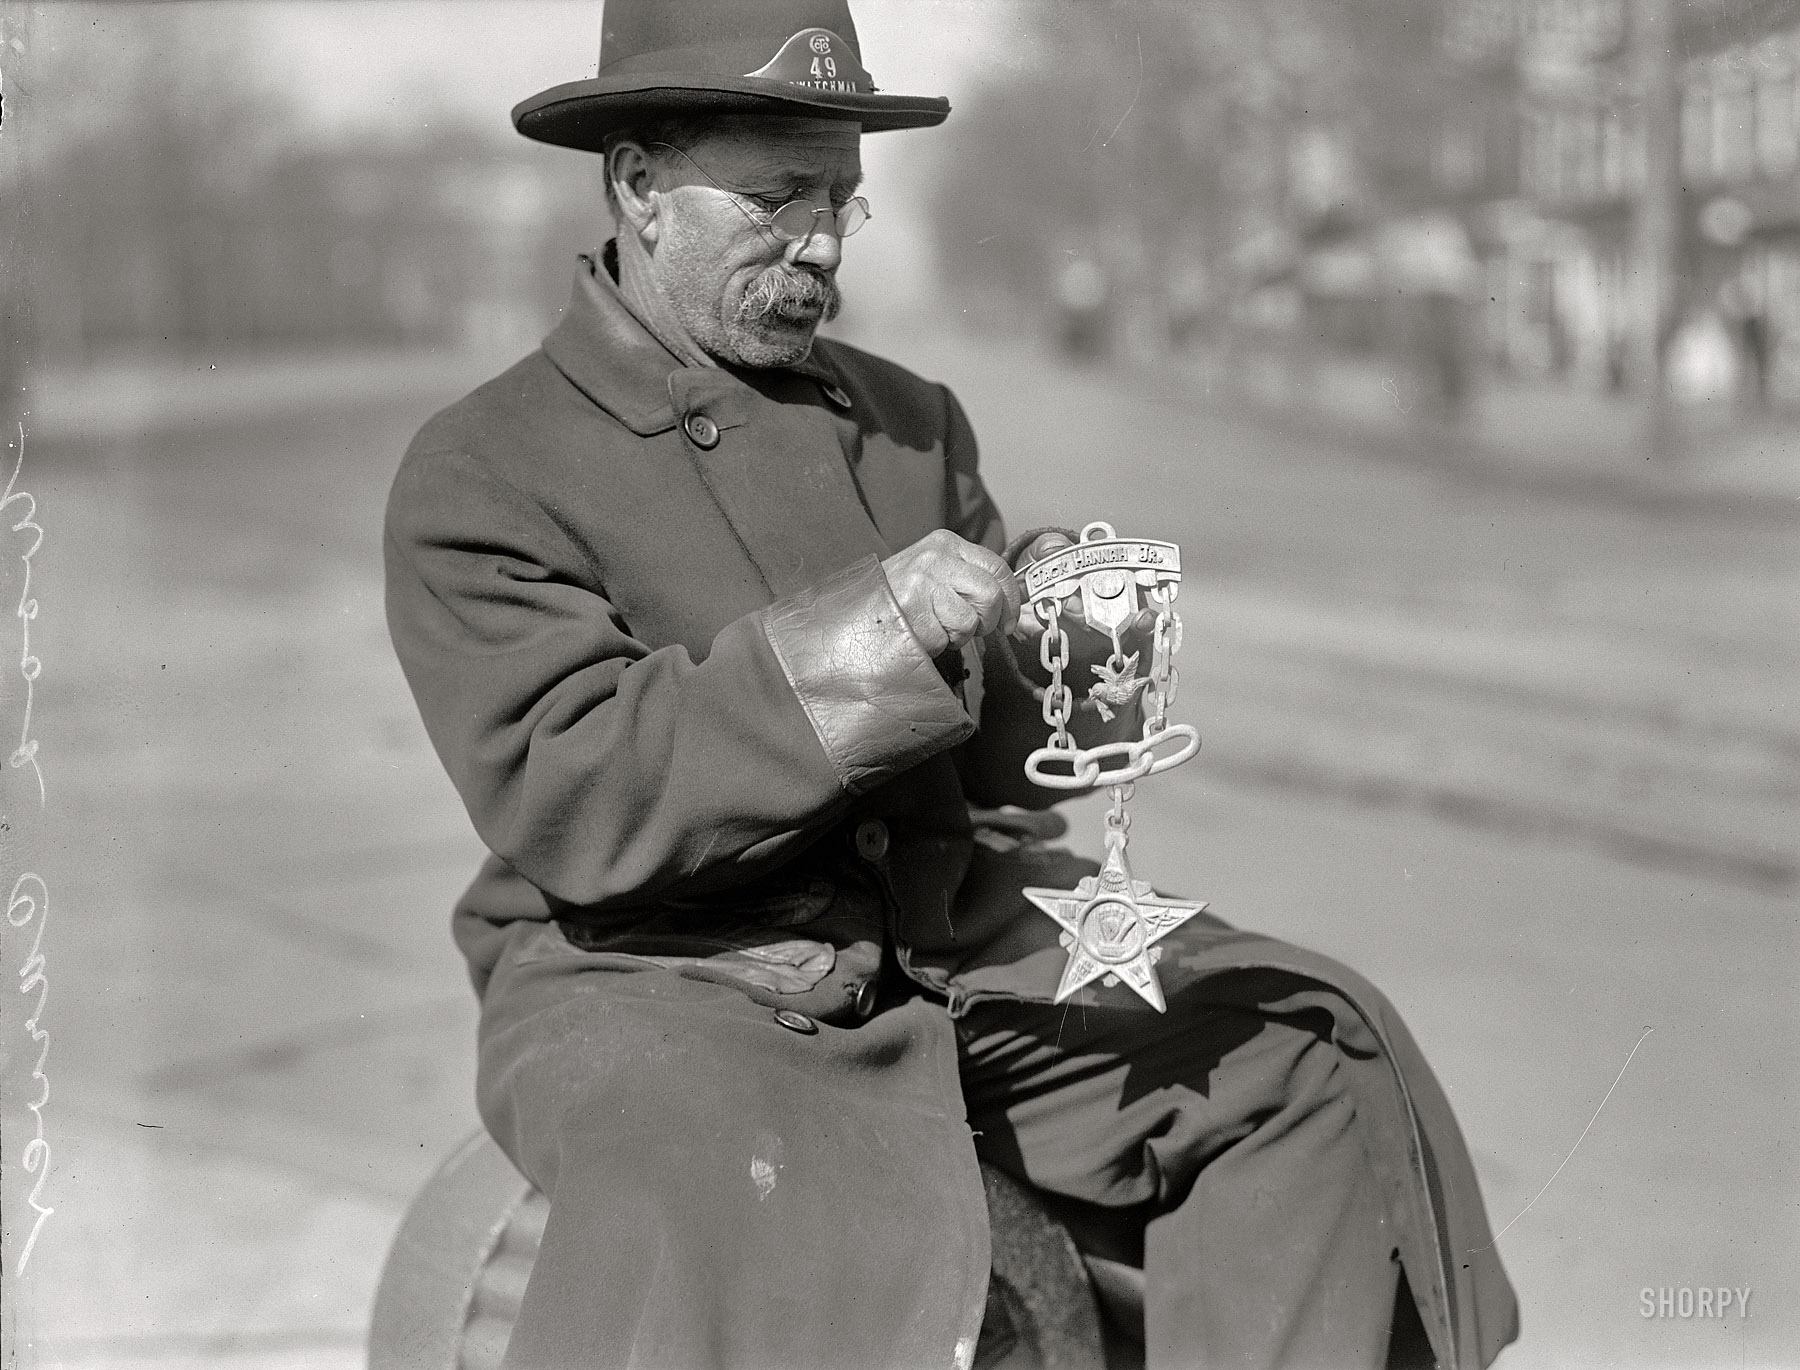 Washington, D.C., 1917. "Grand Army of the Republic. Emblem carved in wood by switchman at peace monument." The G.A.R. was a fraternal organization whose members were Union Army veterans. Harris & Ewing. View full size.